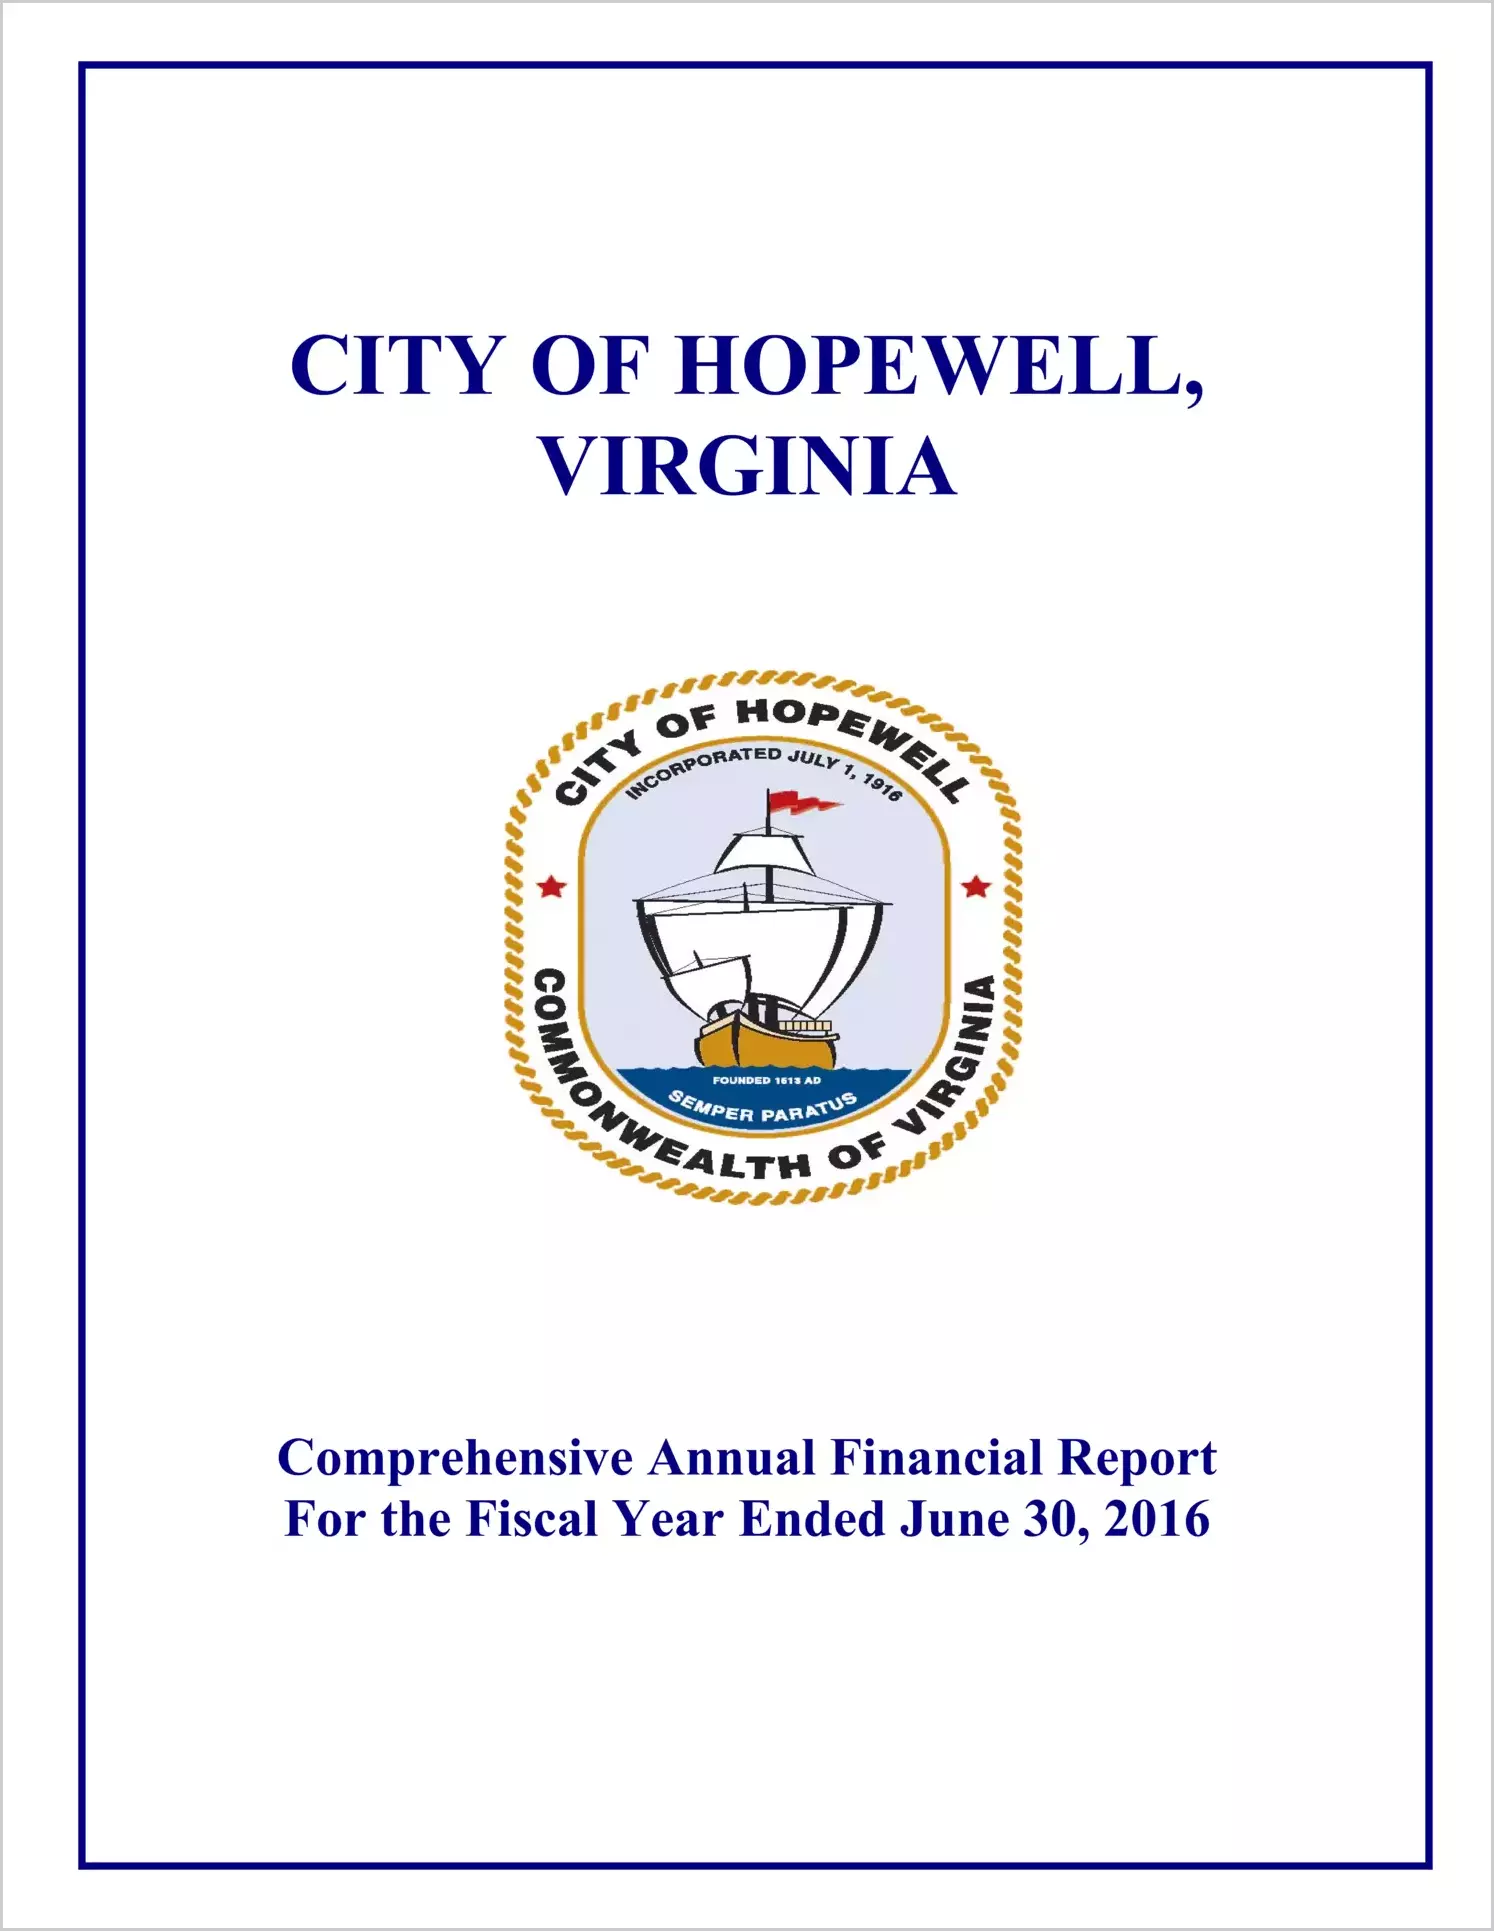 2016 Annual Financial Report for City of Hopewell